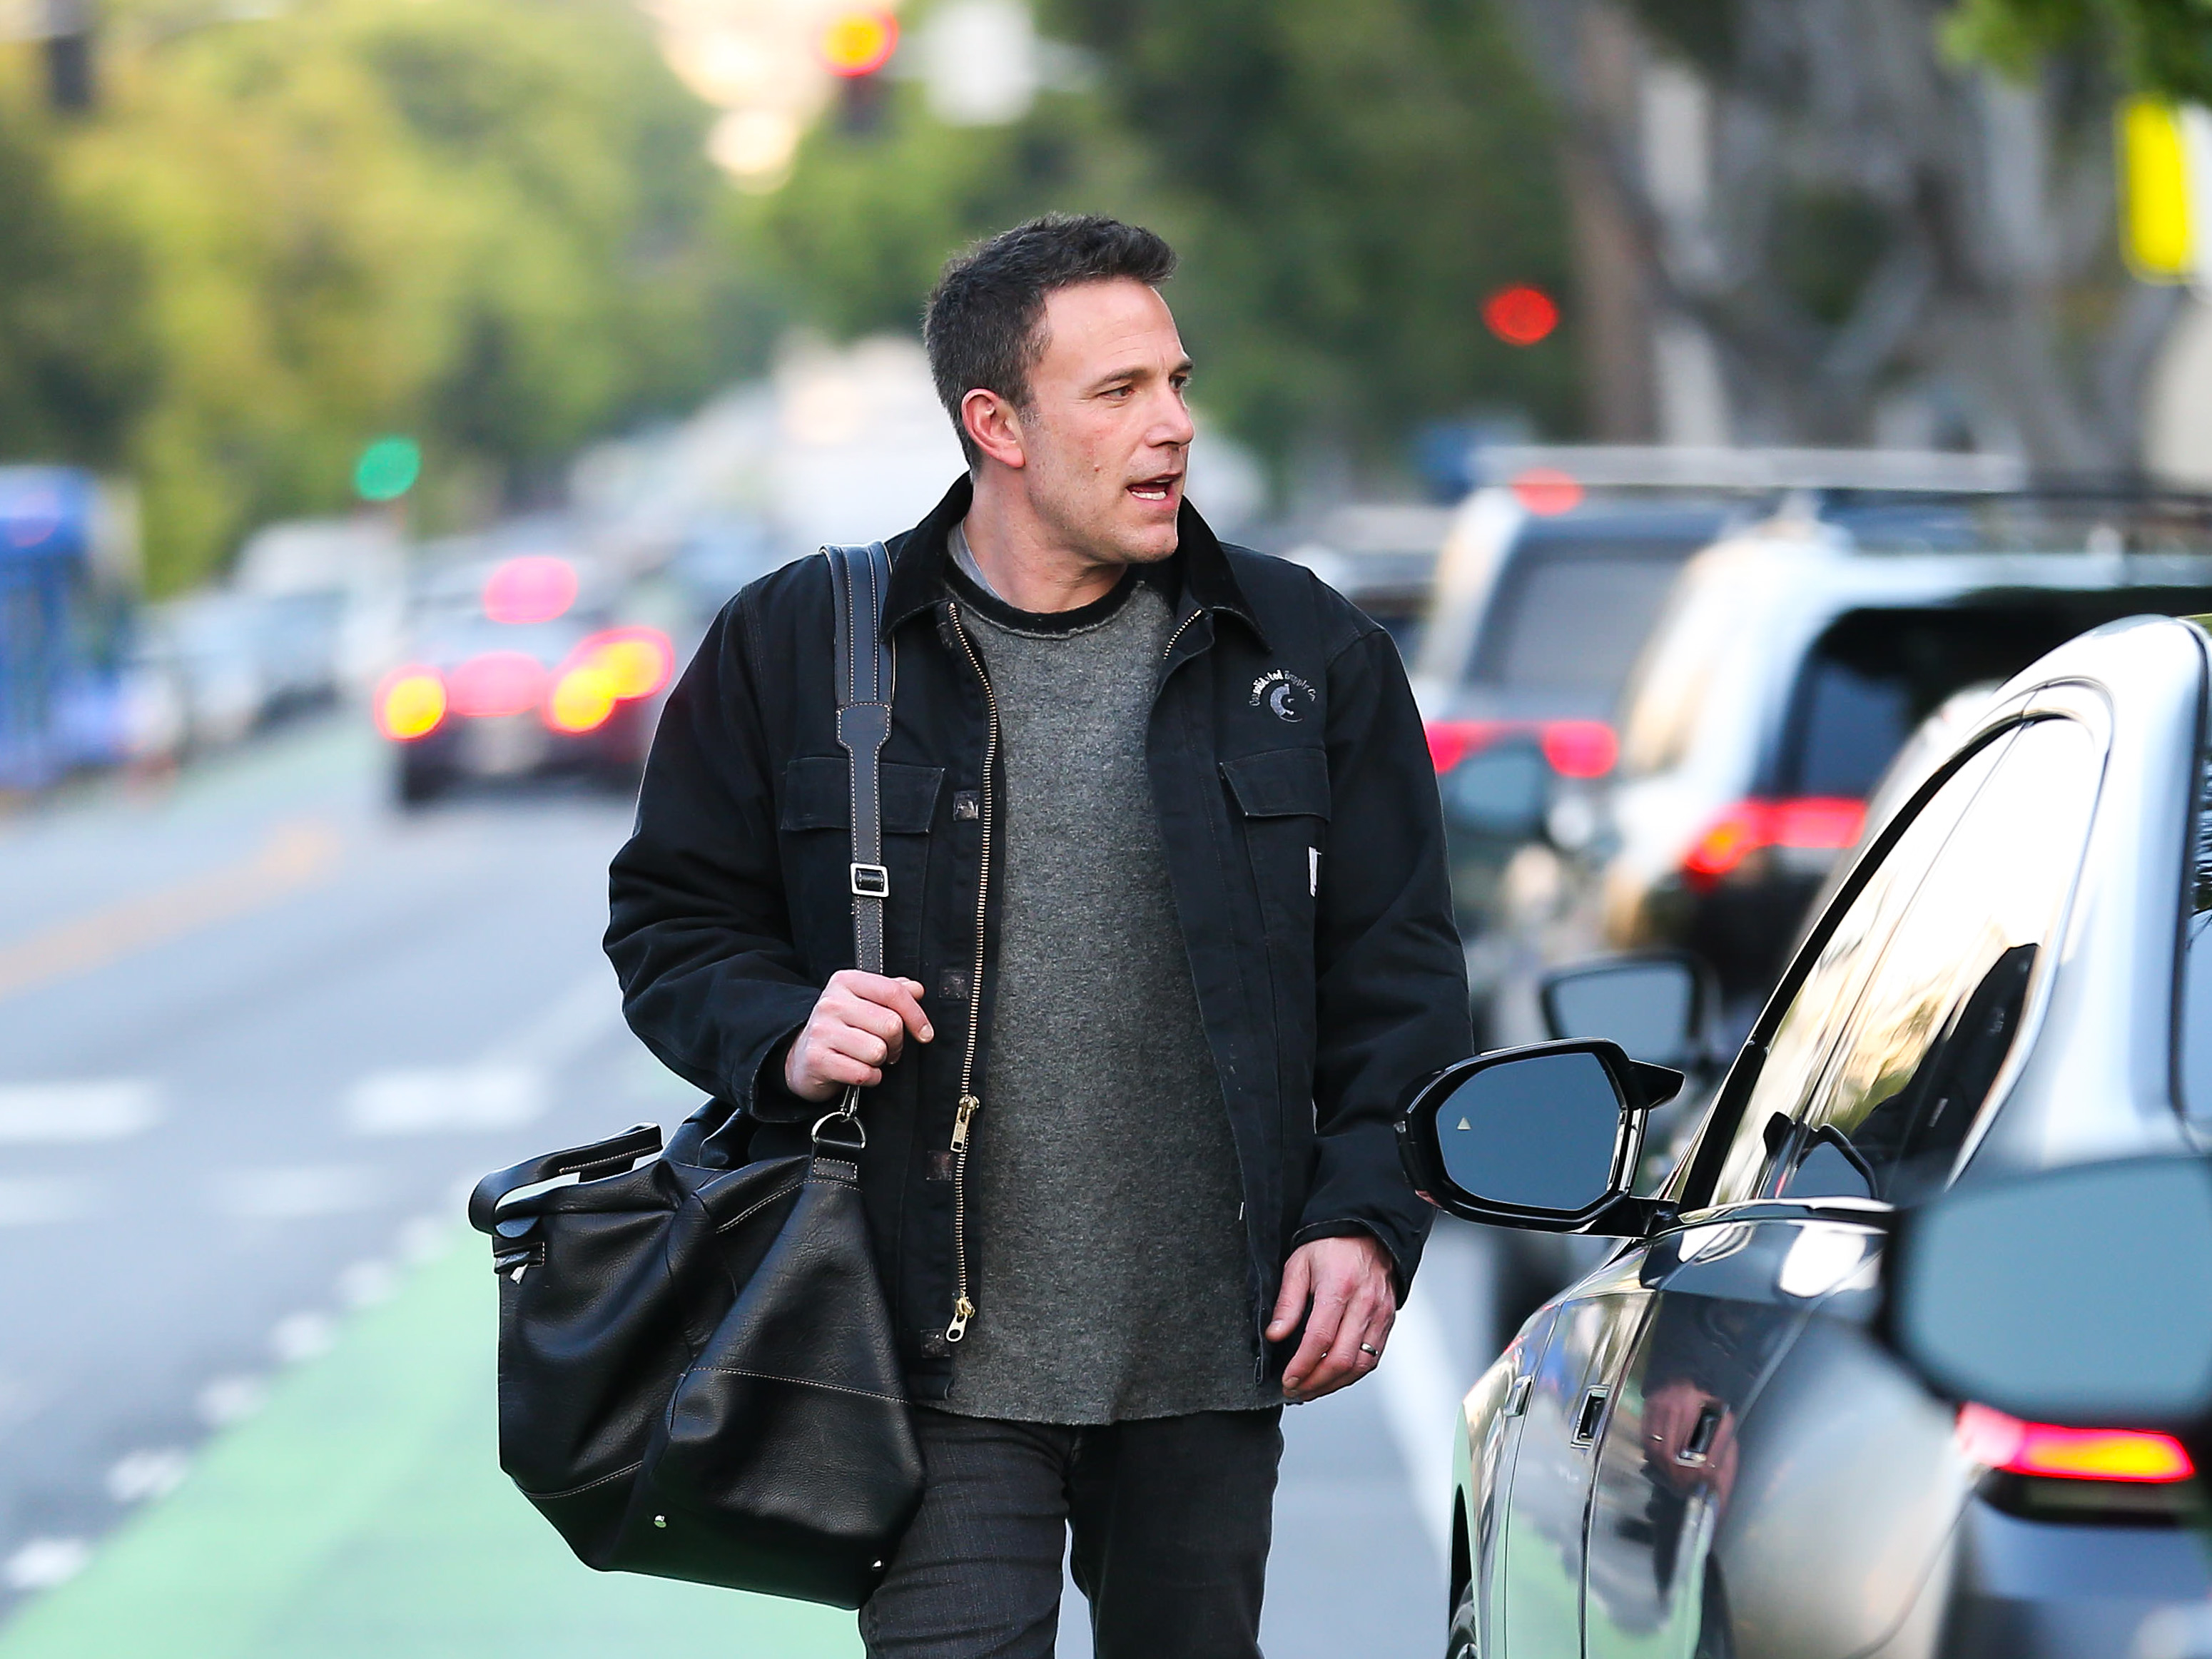 Ben Affleck walks on a city street wearing casual attire, carrying a large black bag, and looking towards a car